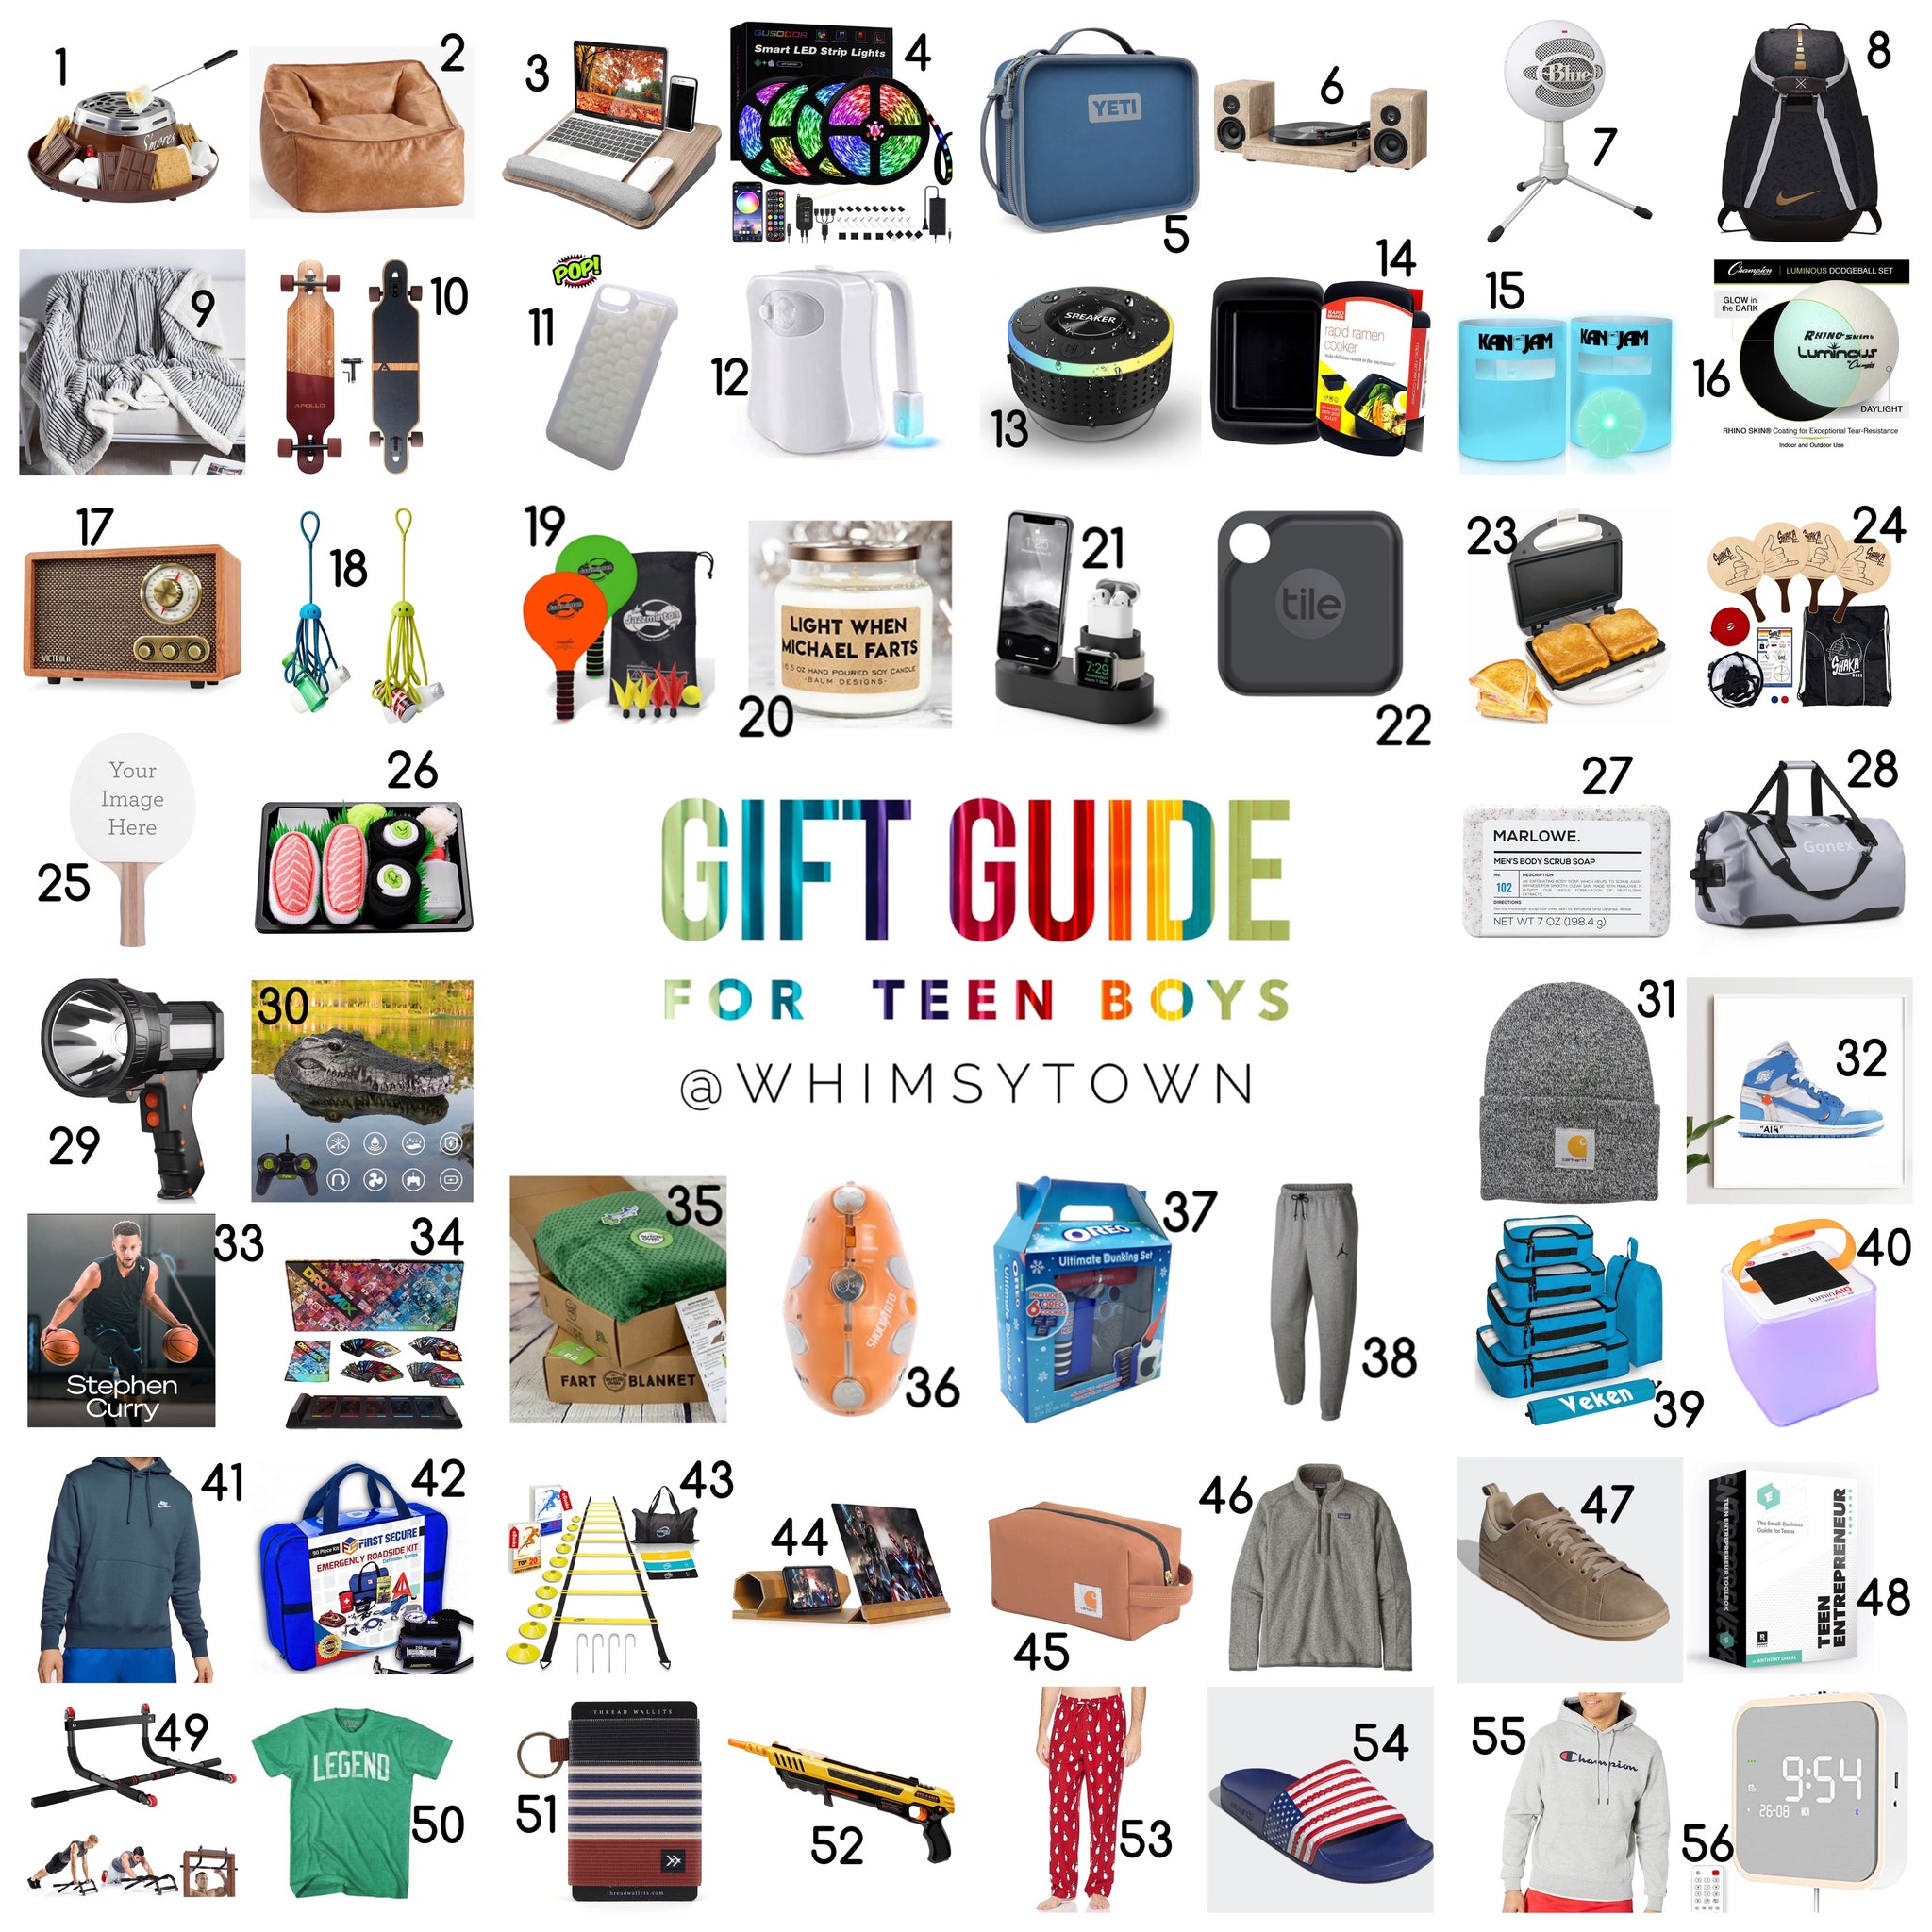 2020 Gift Guide for Teen Boys – Whimsy Town